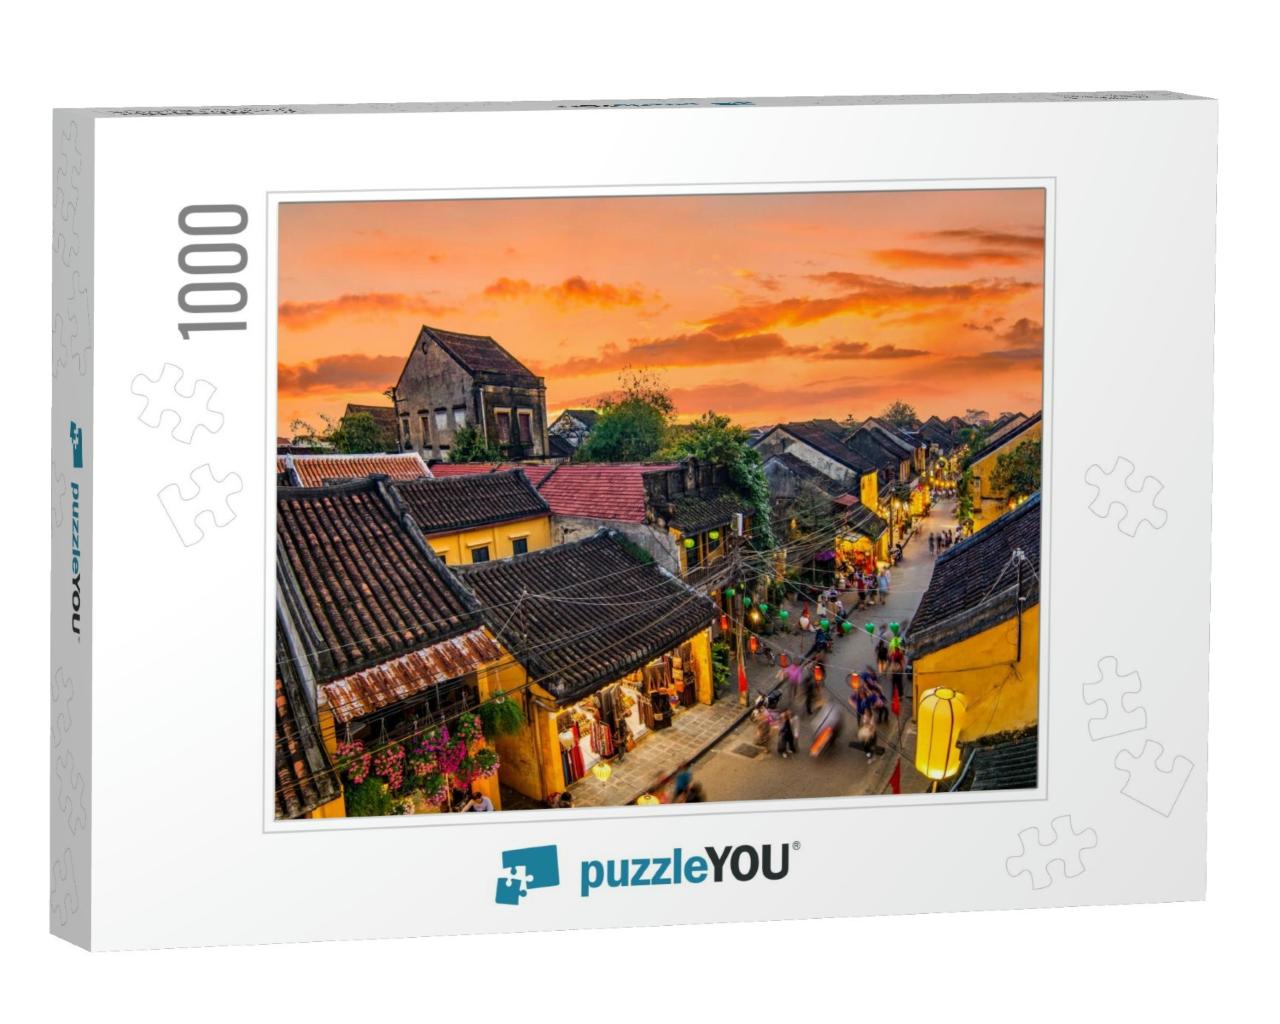 Hoi An, Vietnam High View of Hoi an Ancient Town Which is... Jigsaw Puzzle with 1000 pieces